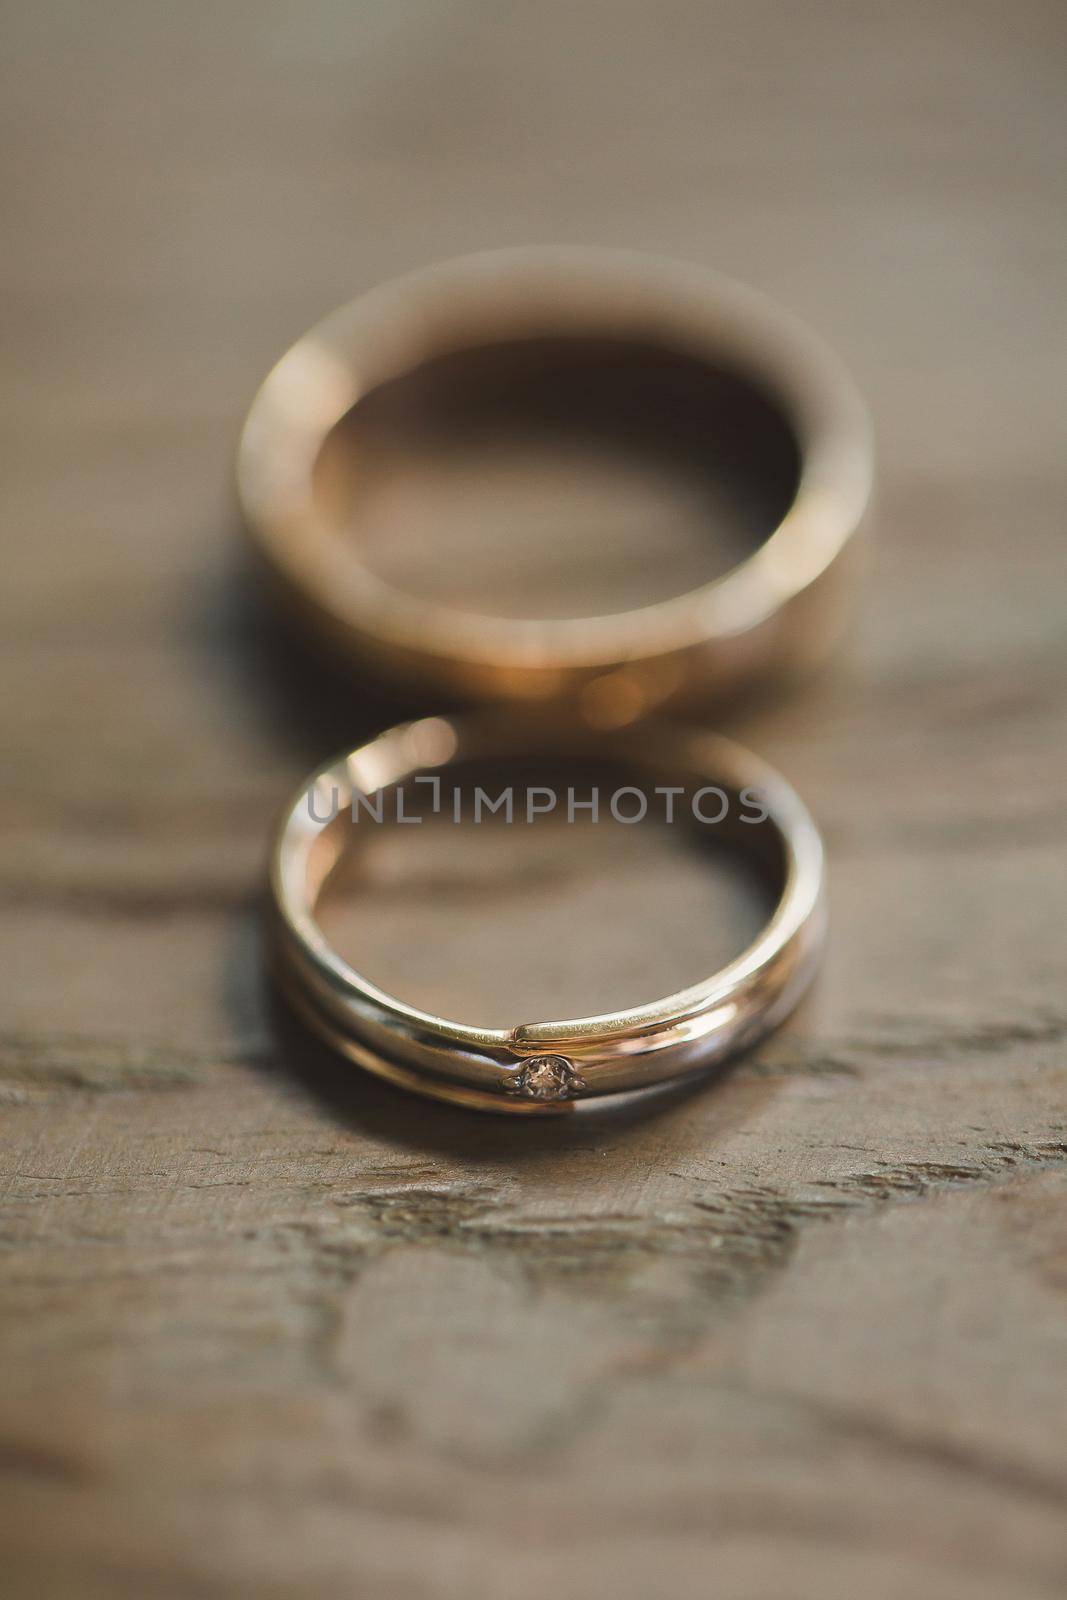 Wedding rings on a wooden texture close-up.